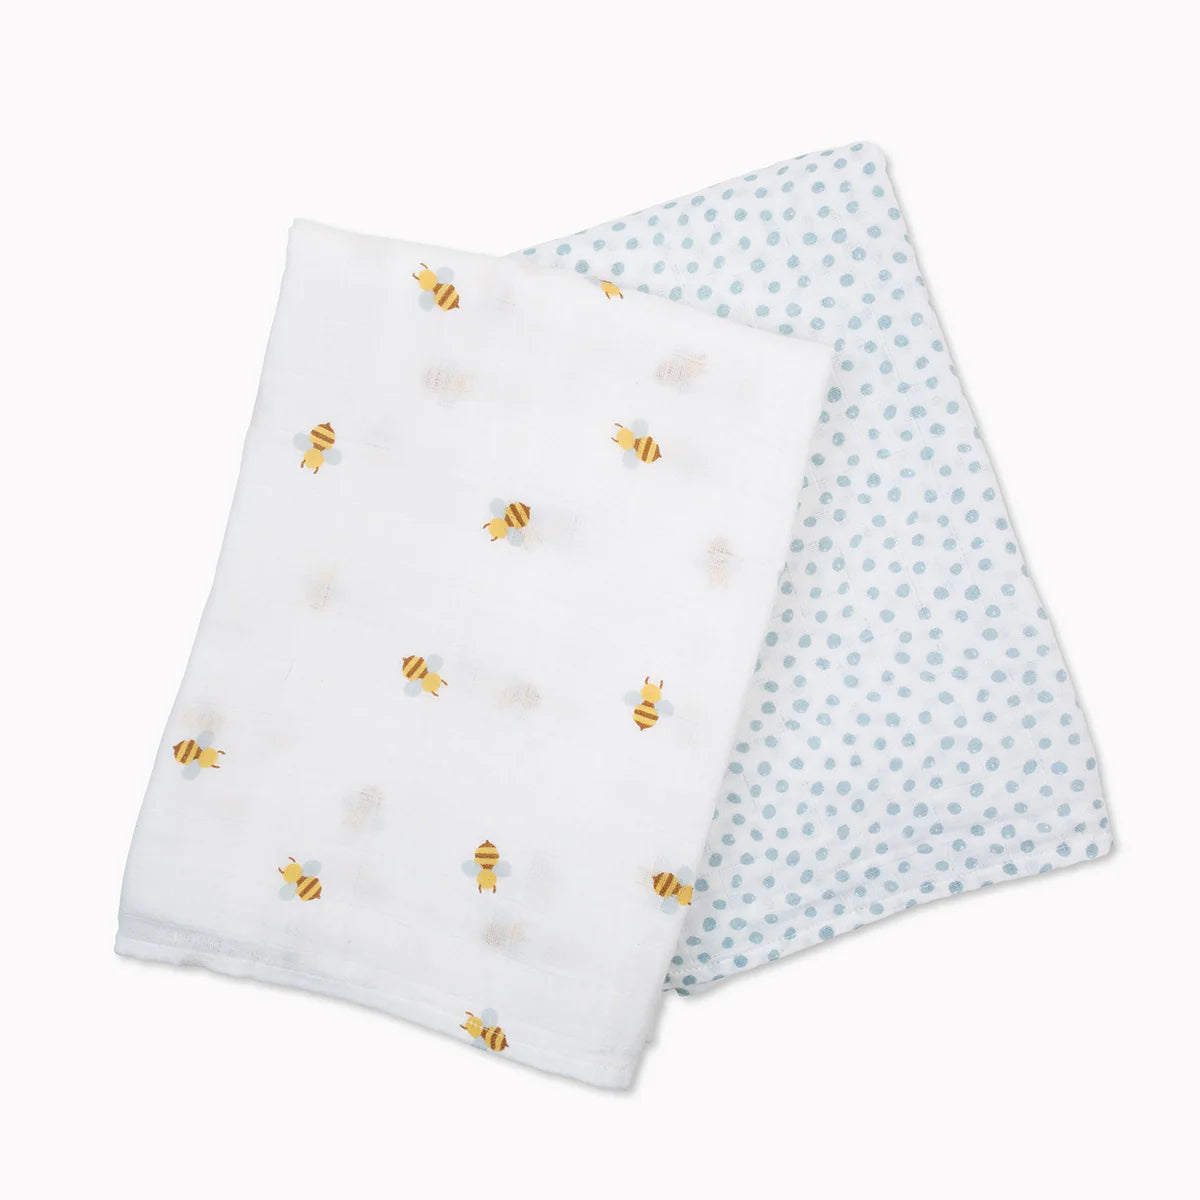 2-pack Cotton Swaddles - Bees & Dots